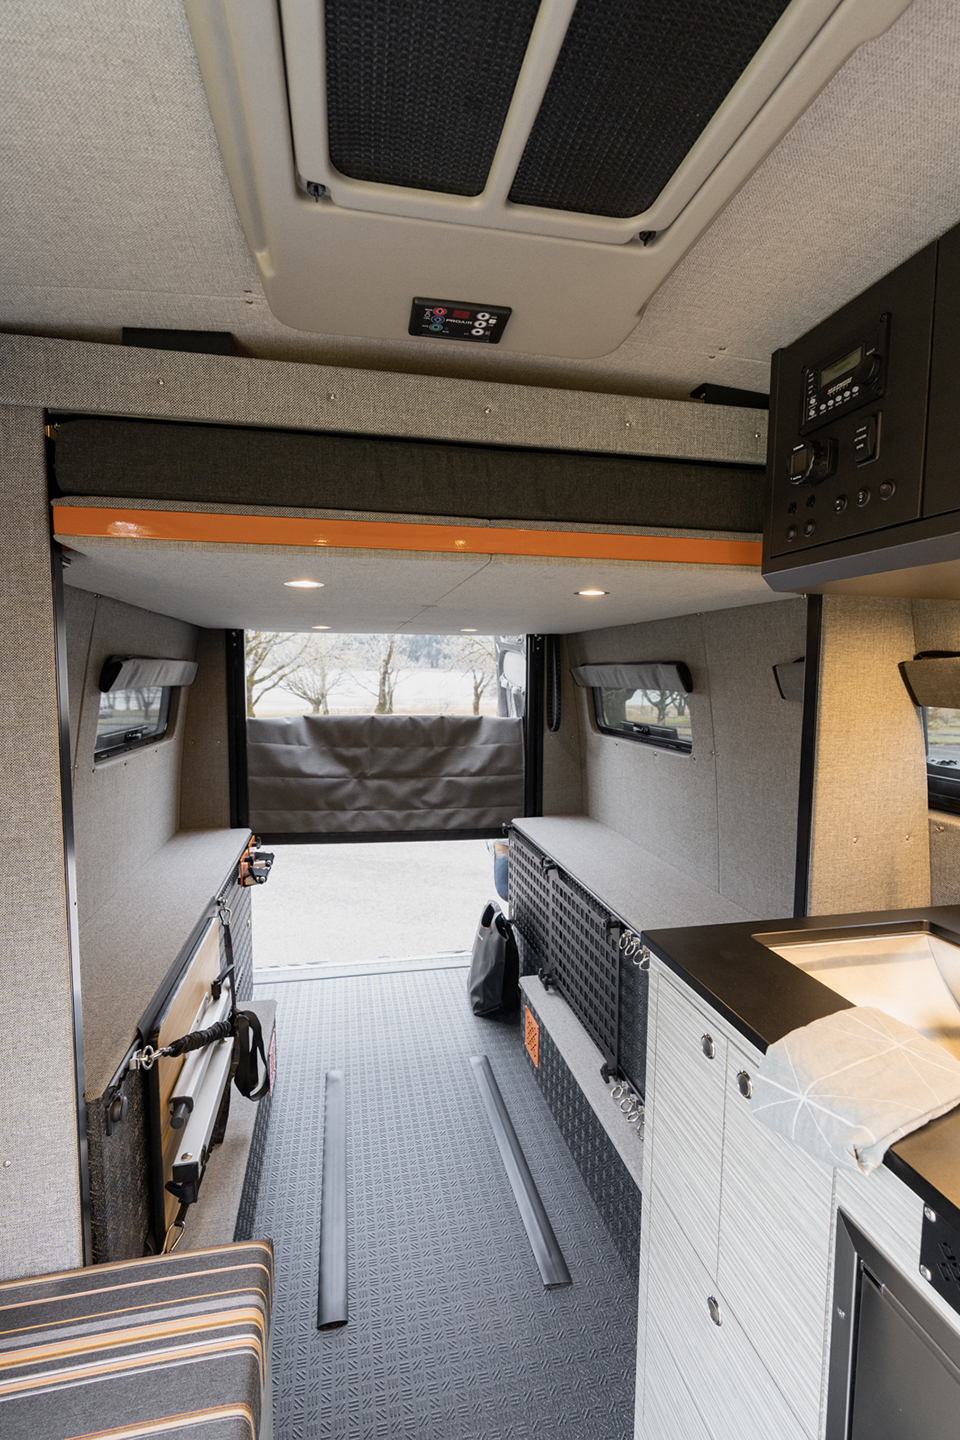 Interior cabin with electronic bed raised, custom orange and grey upholstery seating